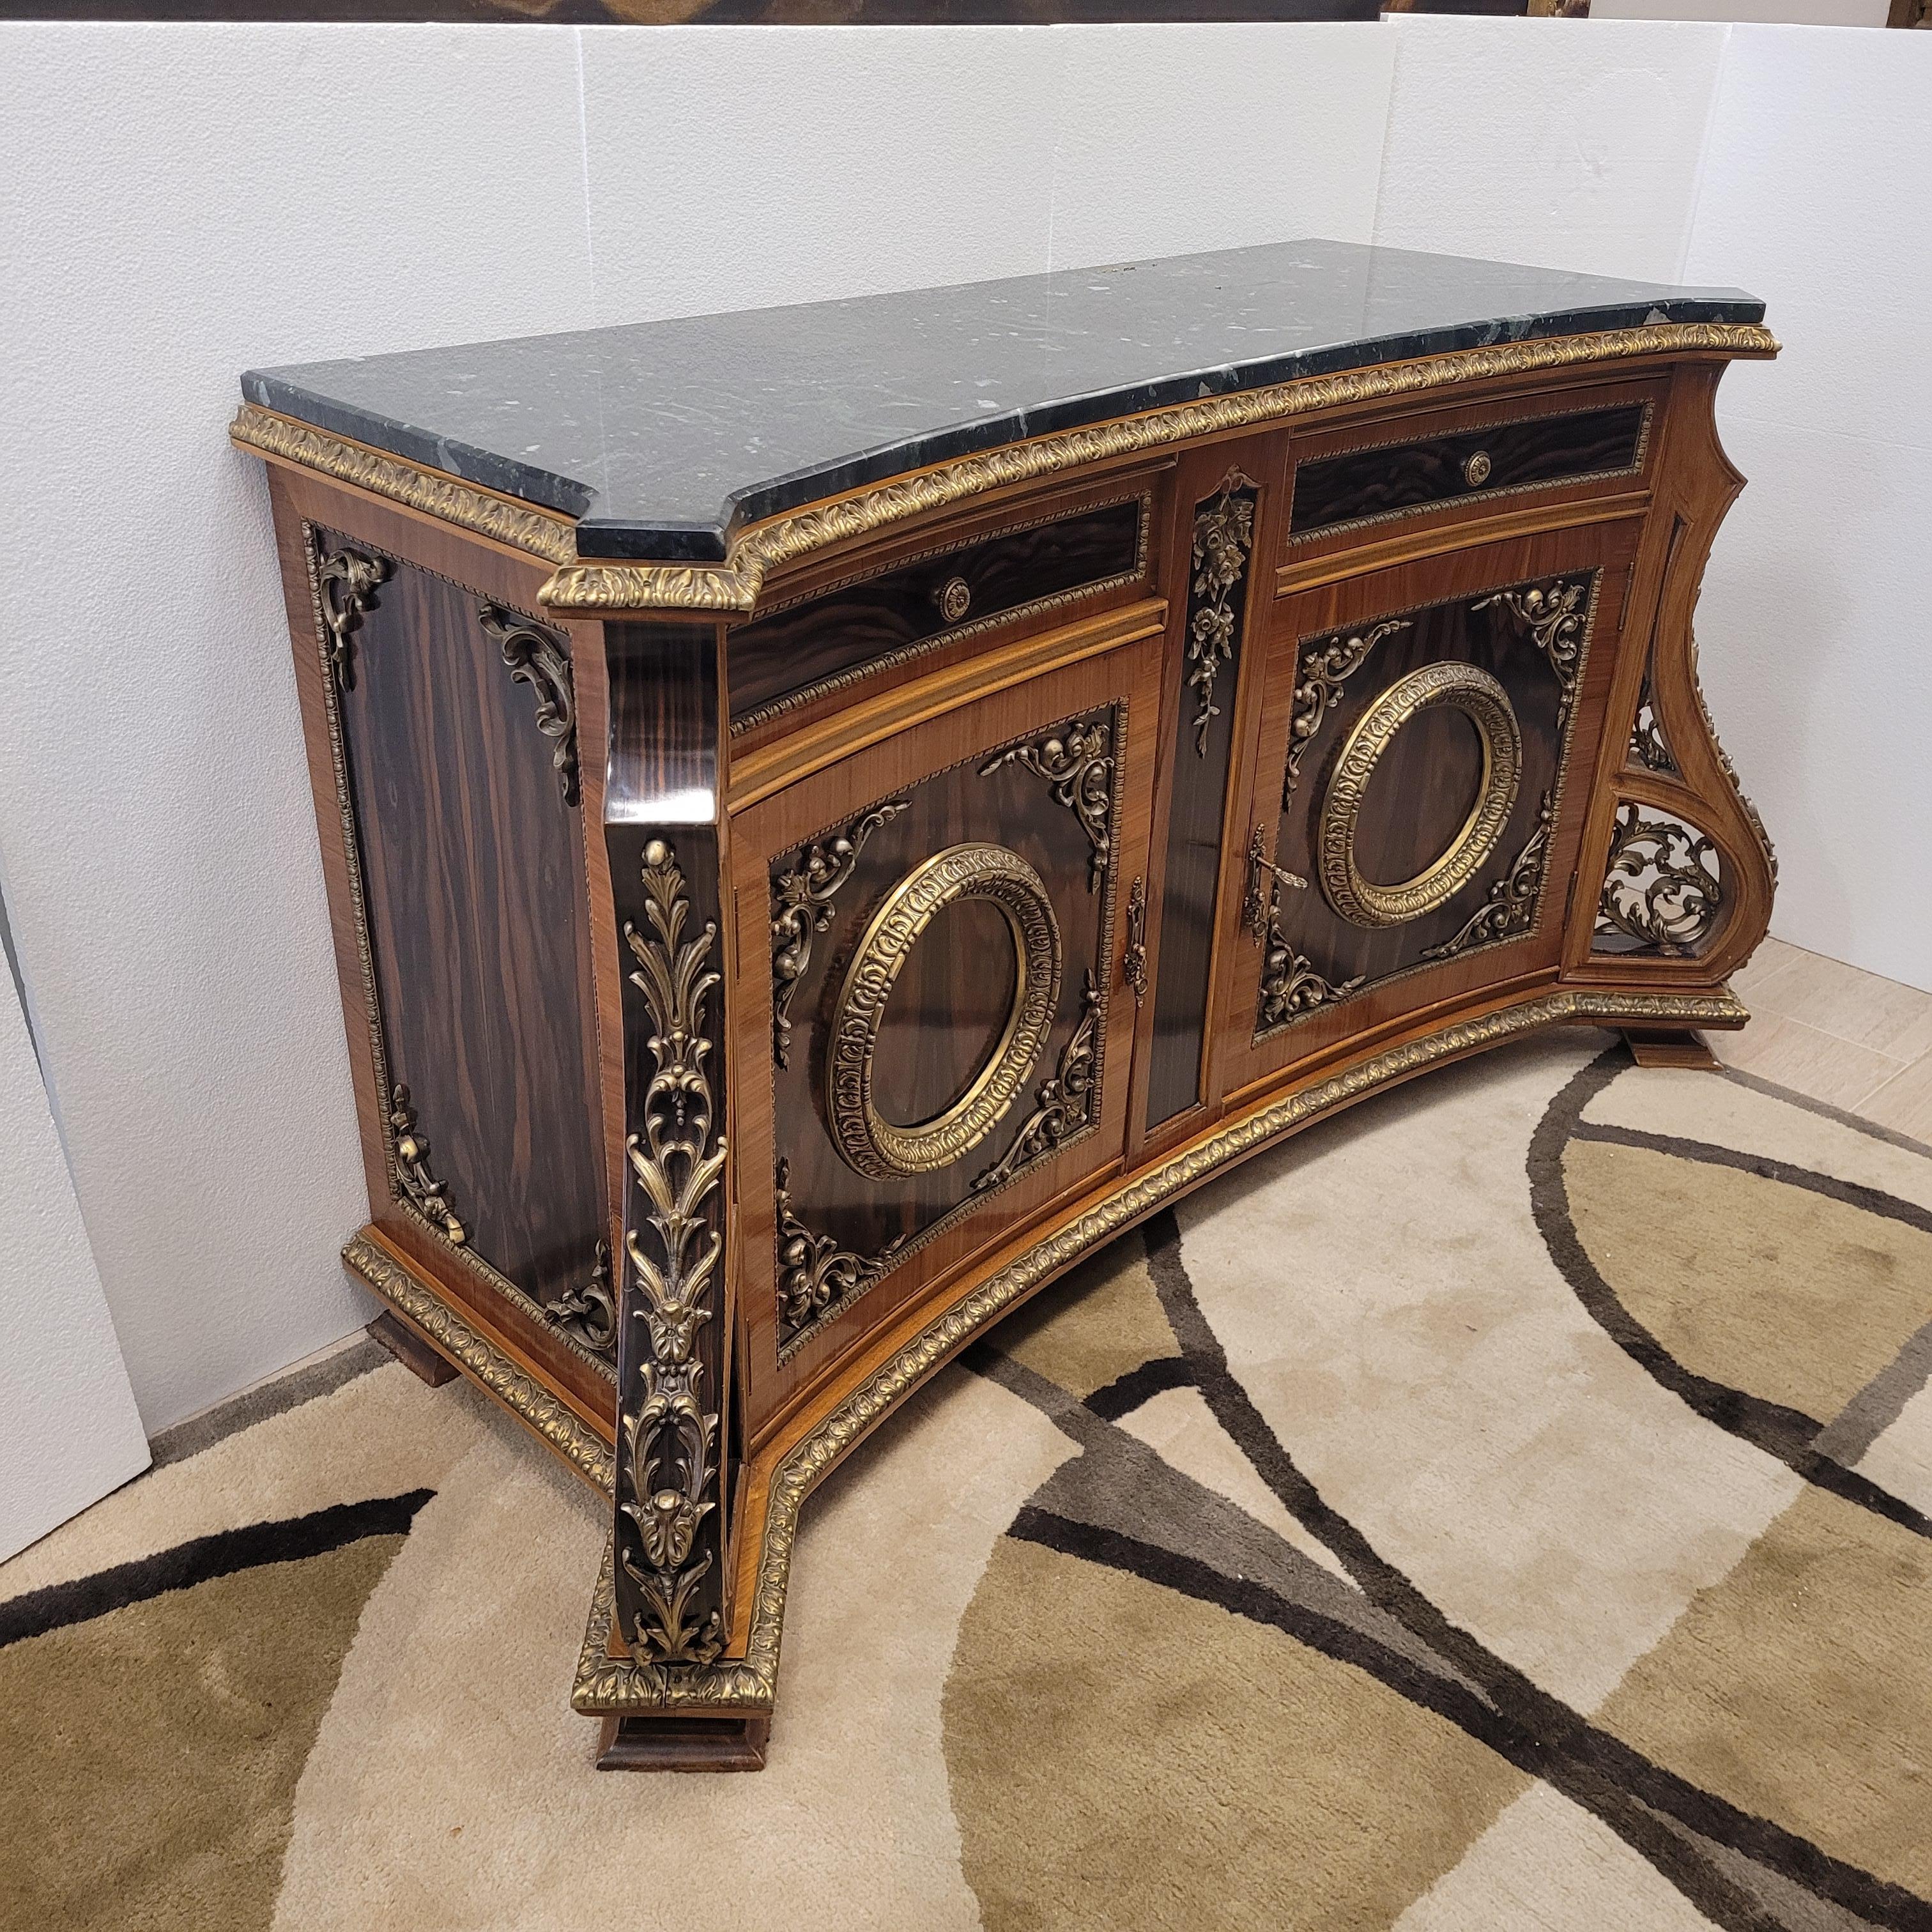 Spectacular and one of a kind French Napoleon III style sideboard in exotic and precious woods such as rosewood. Counter top in black marble and bronze throughout its presentation.
It comes from a private collection in France.
Enriched with bronze